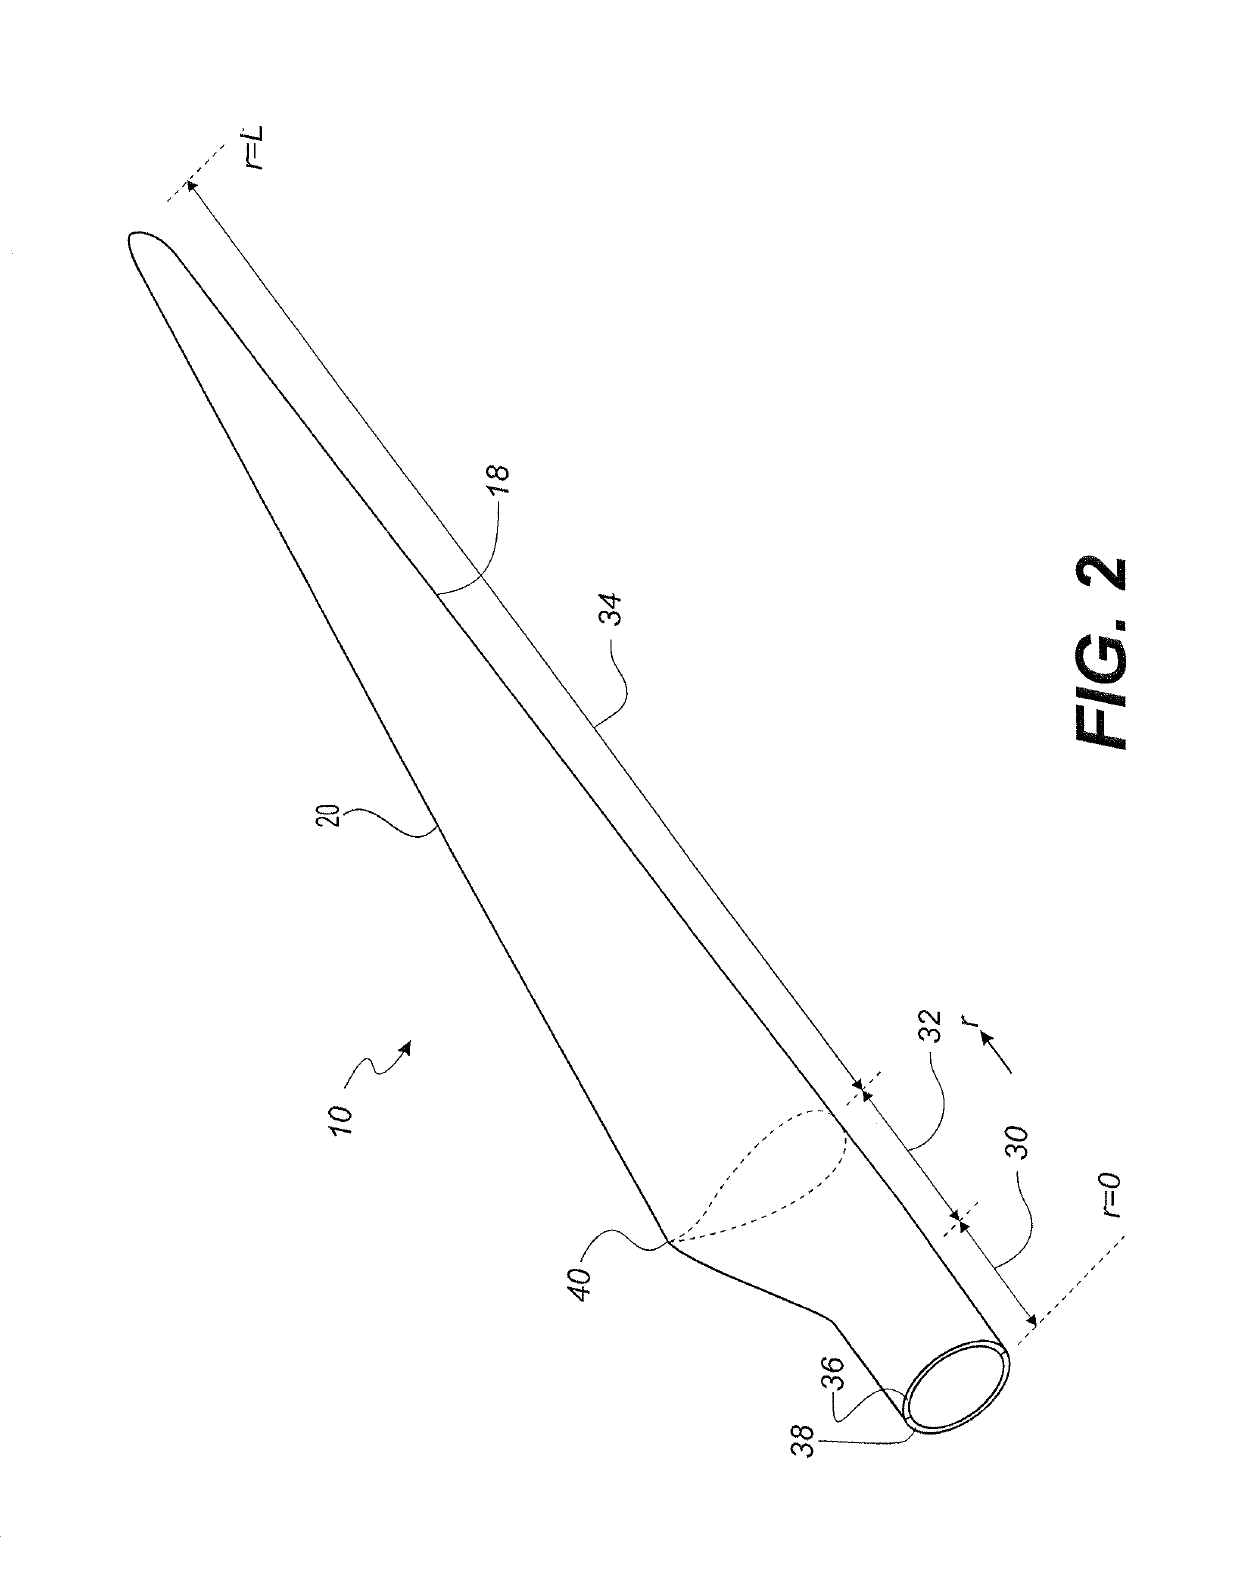 Wind turbine blade with improved fibre transition